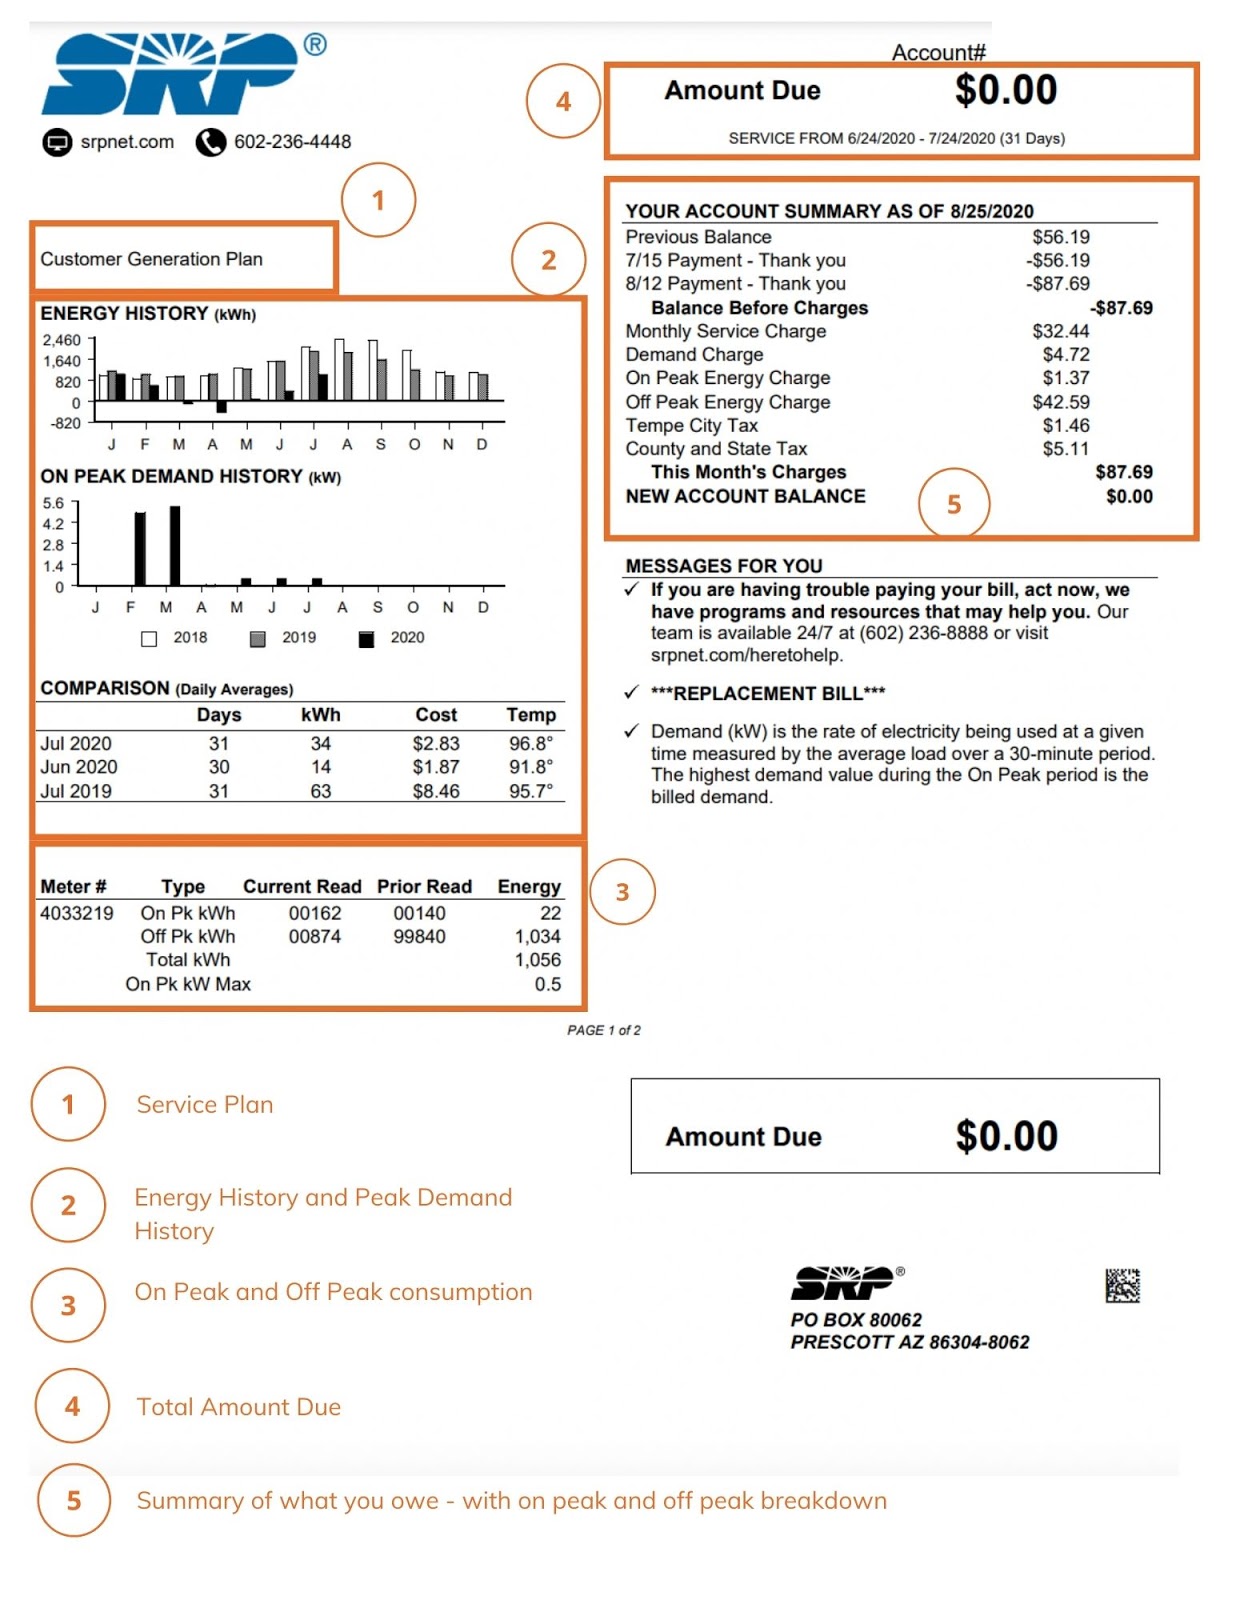 SRP electric bill after solar page 1